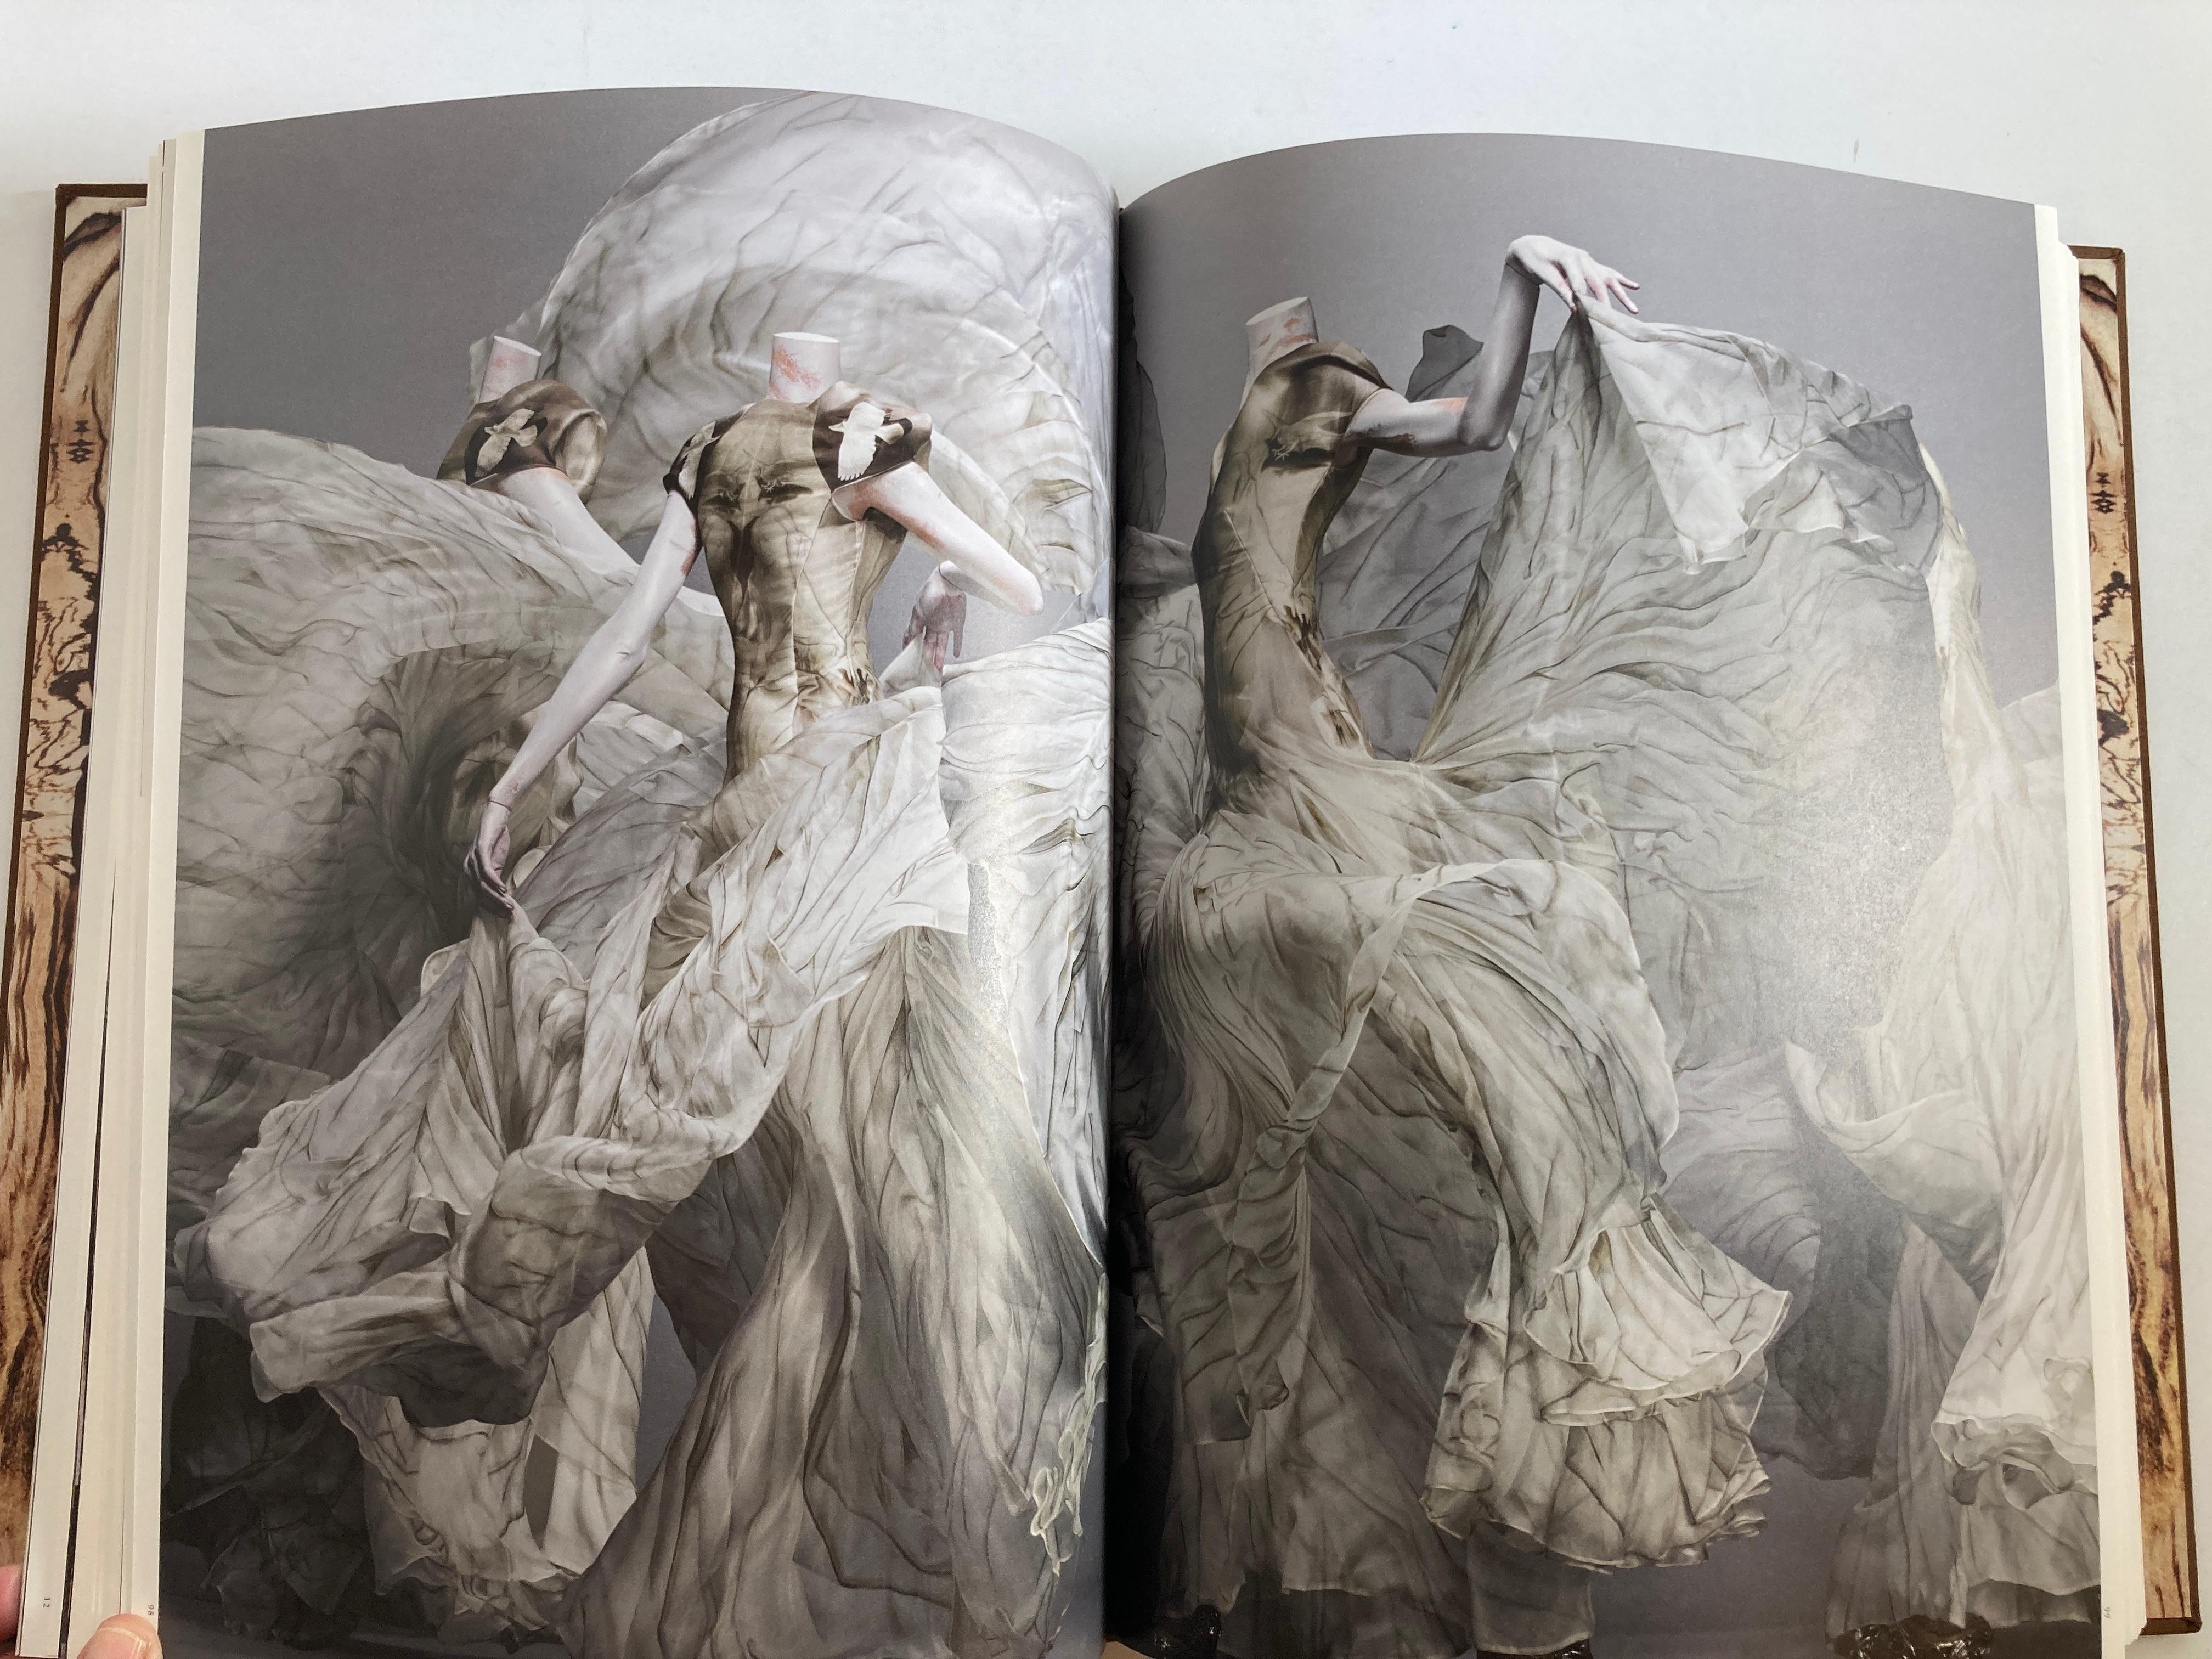 Paper Alexander McQueen Savage Beauty Fashion Art Table Book